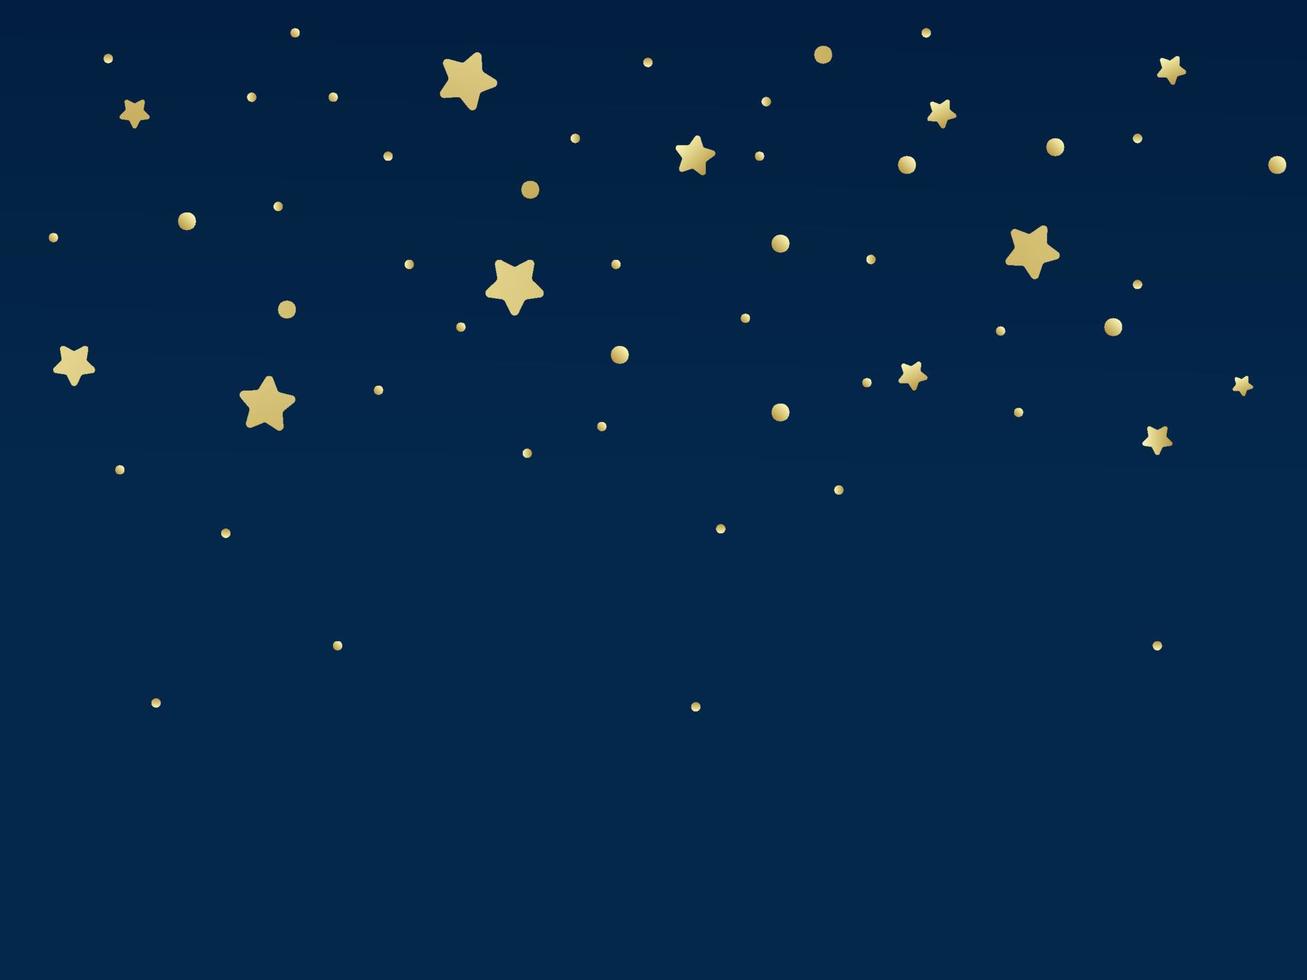 Star background wallpaper Christmas New year sky Vector